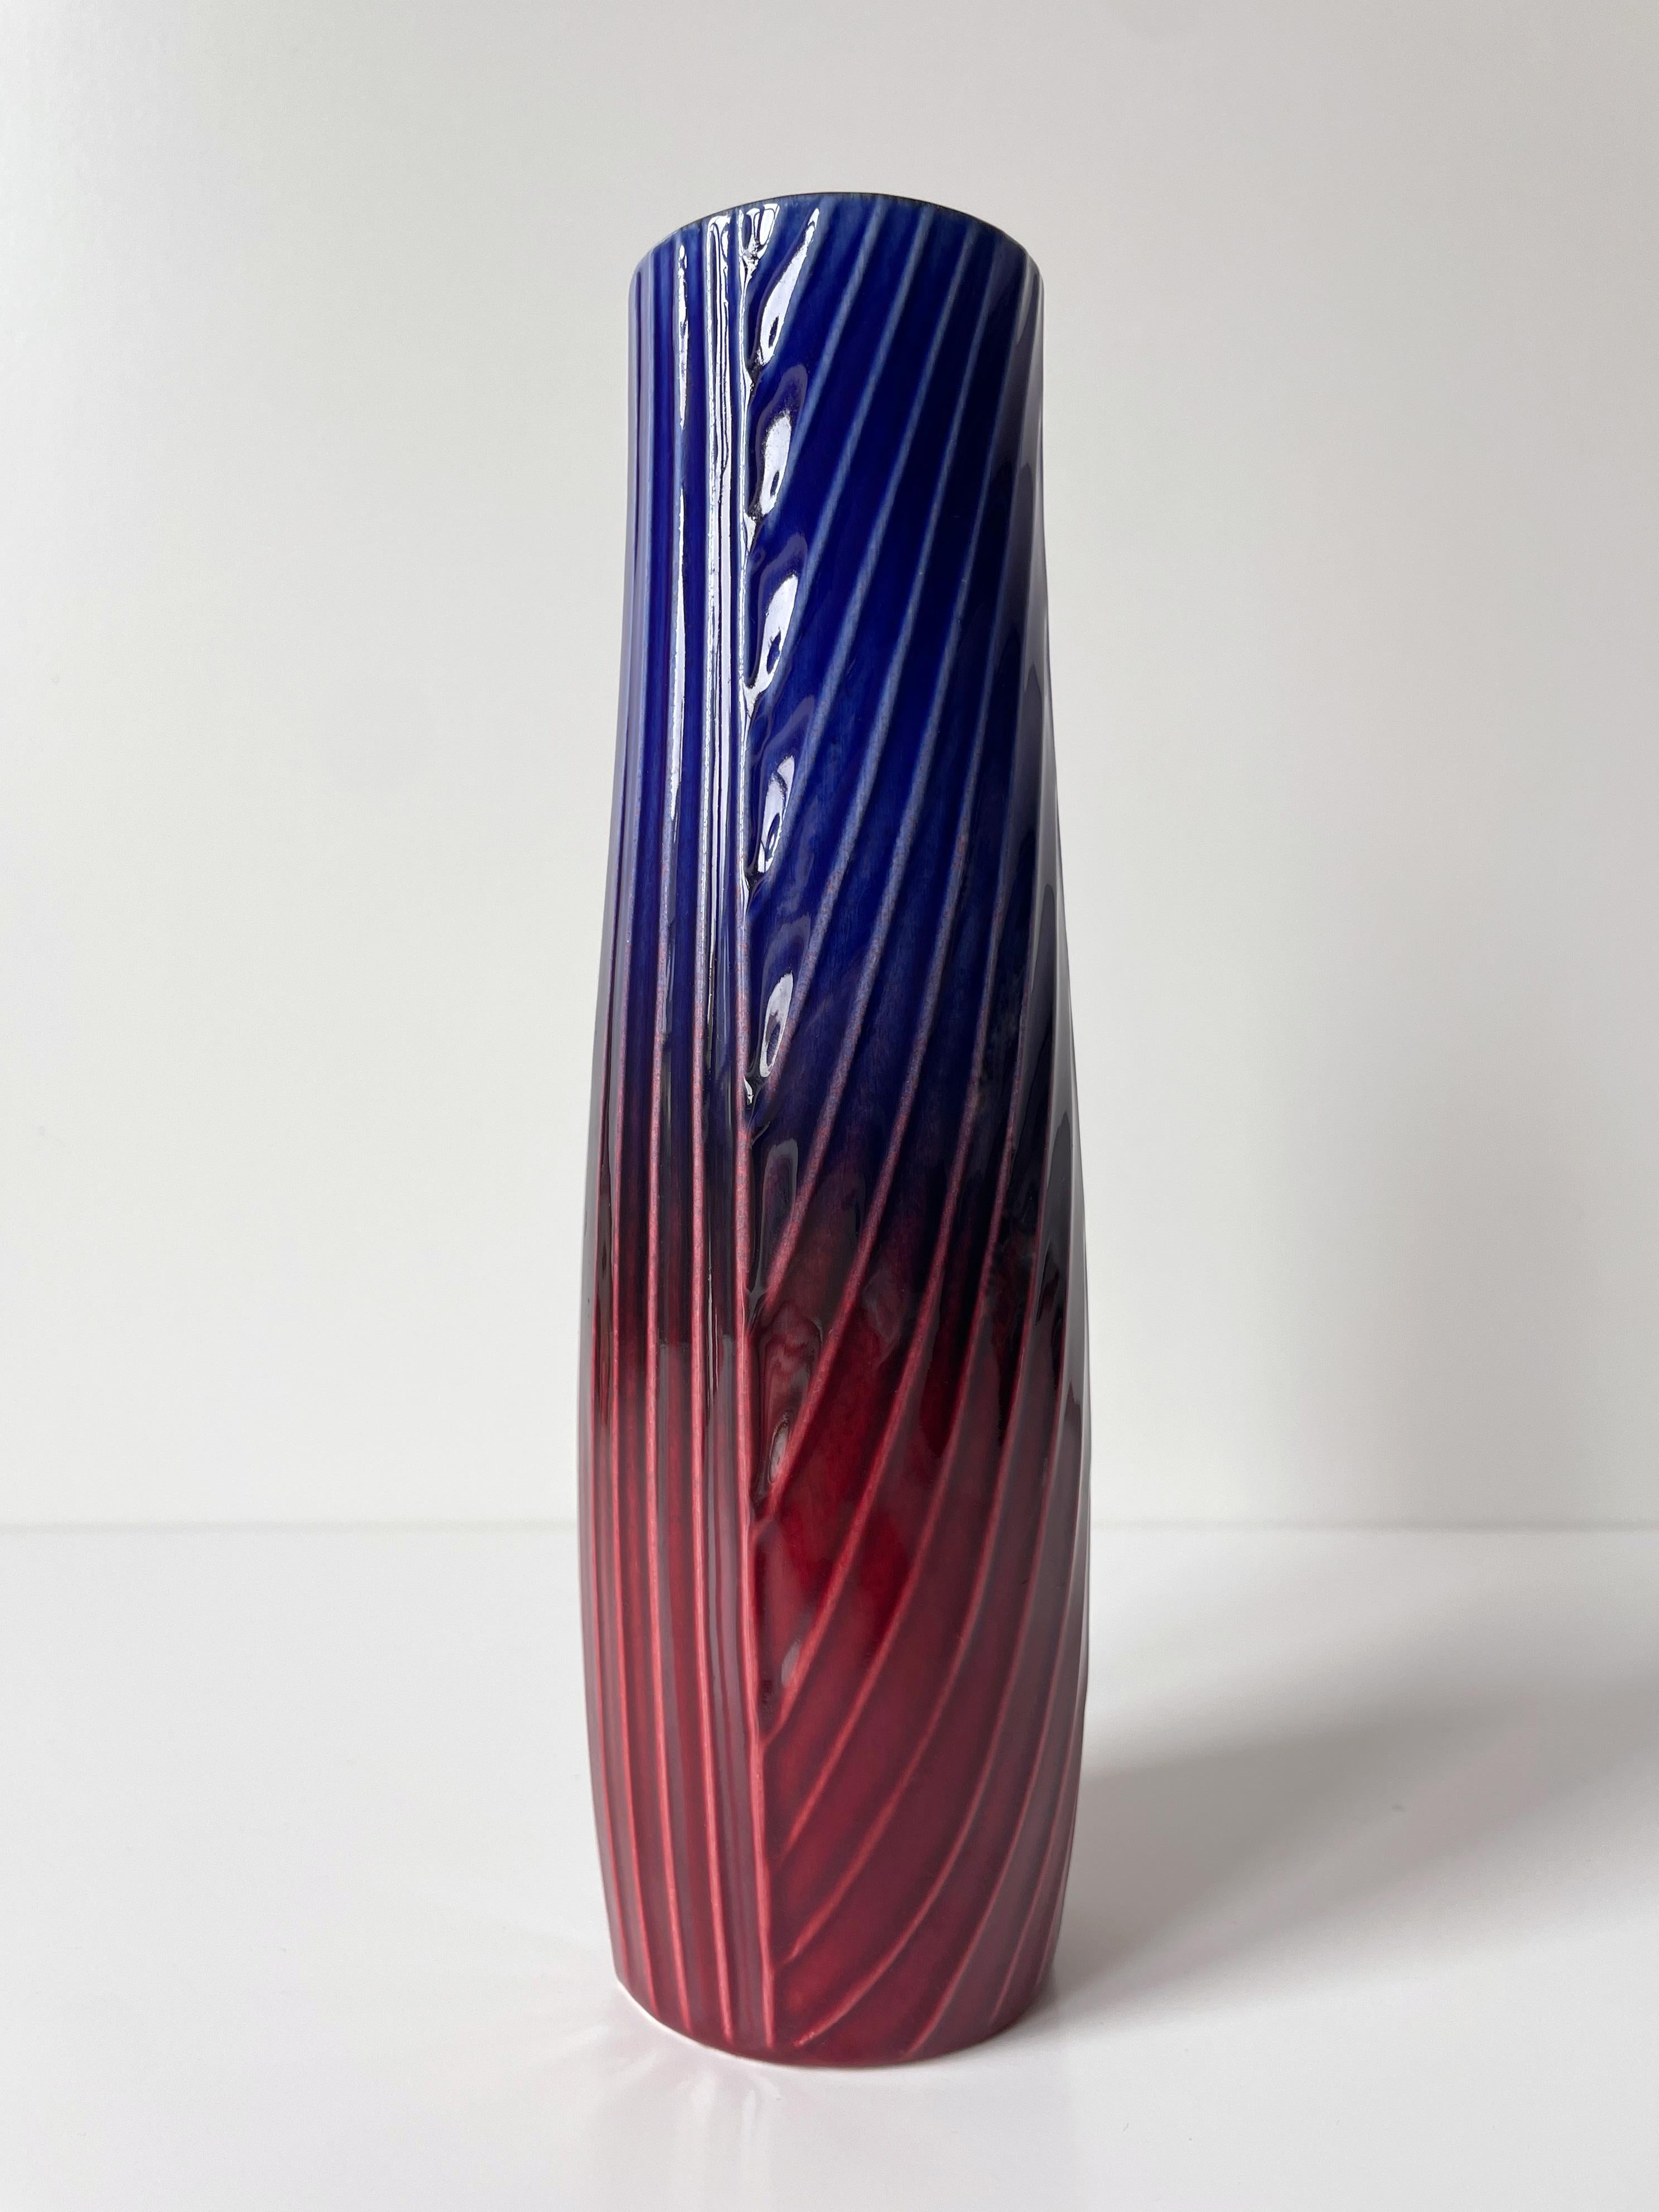 Slender cylinder shaped stoneware vase with glossy glaze in cobalt blue, deep purple and burgundy red over linear relief patterns. Acclaimed artist Carl-Harry Stålhane (1920-1990) designed the Sparaxis series - sometimes referred to as Anemone - for